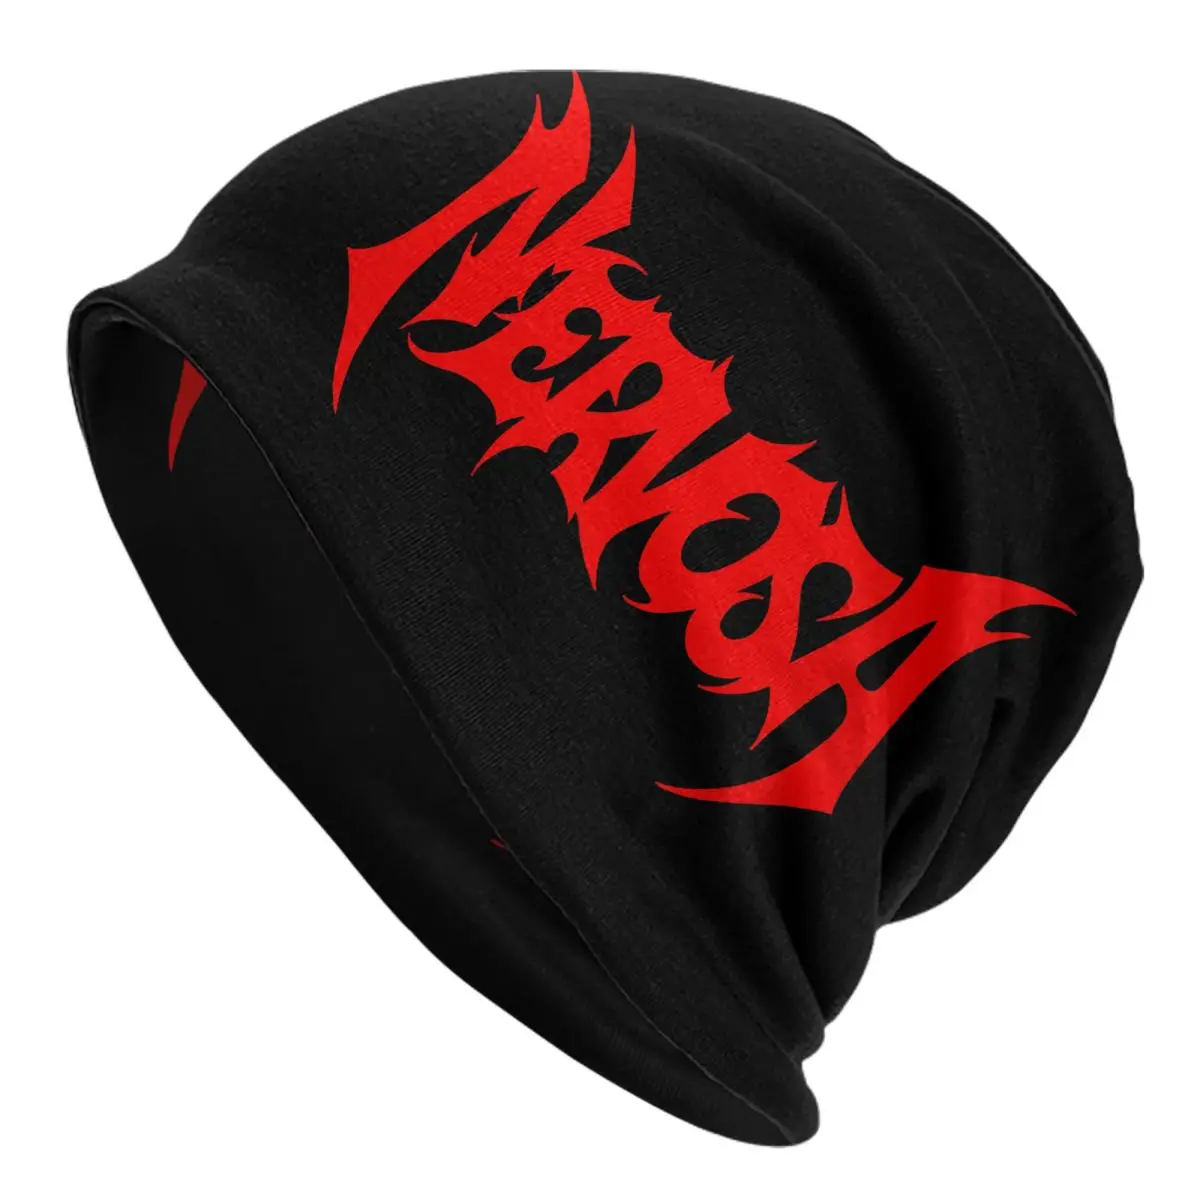 Thrash Metal Band Members Adult Men's Women's Knit Hat Keep warm winter Funny knitted hat